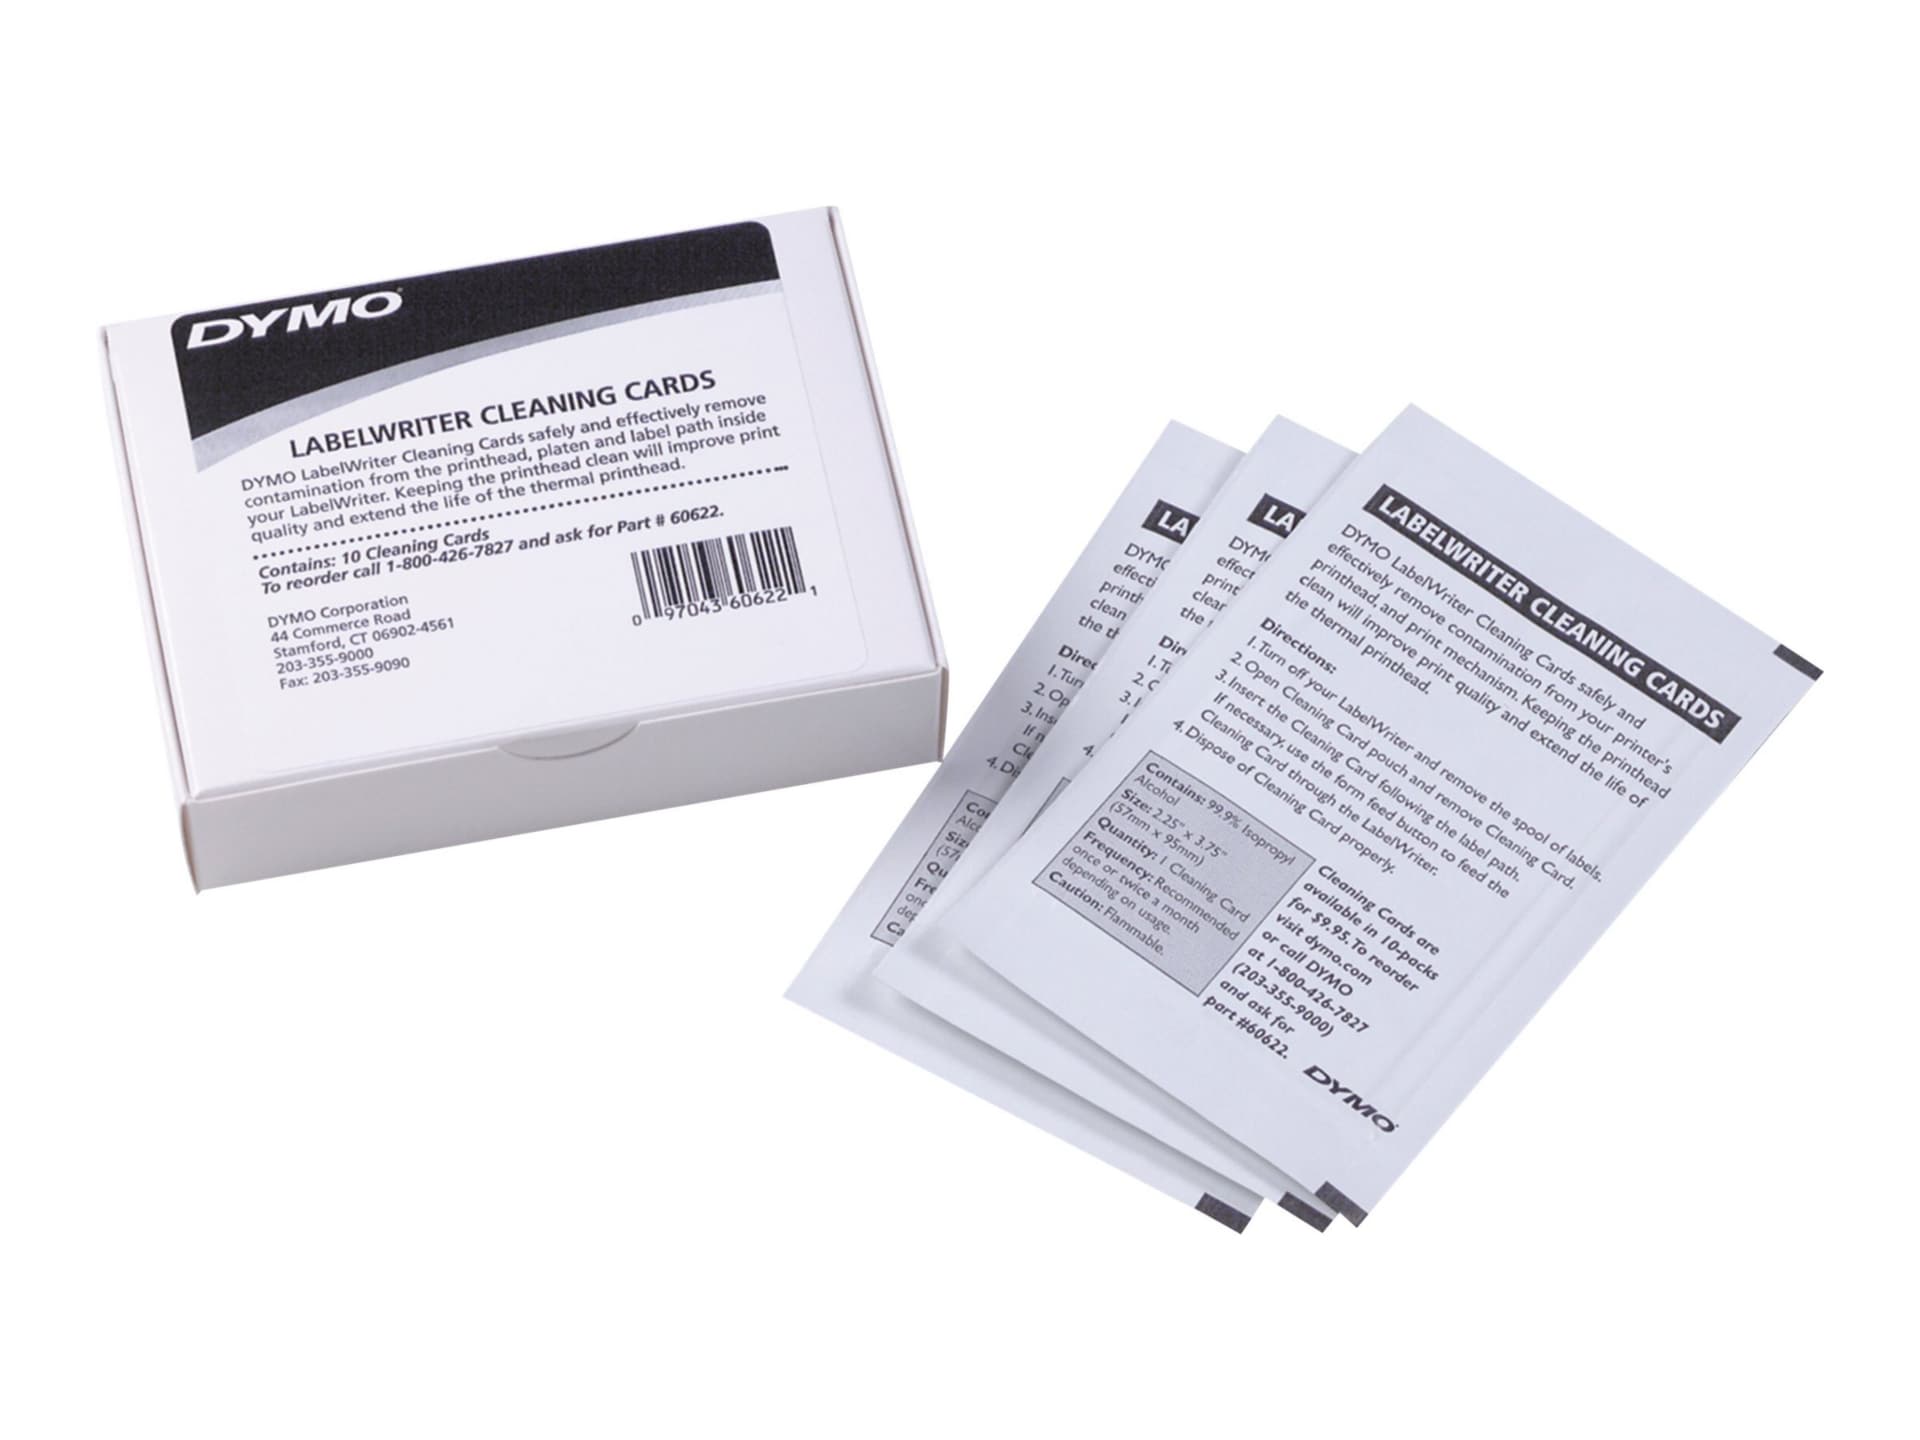 DYMO LabelWriter Cleaning Cards